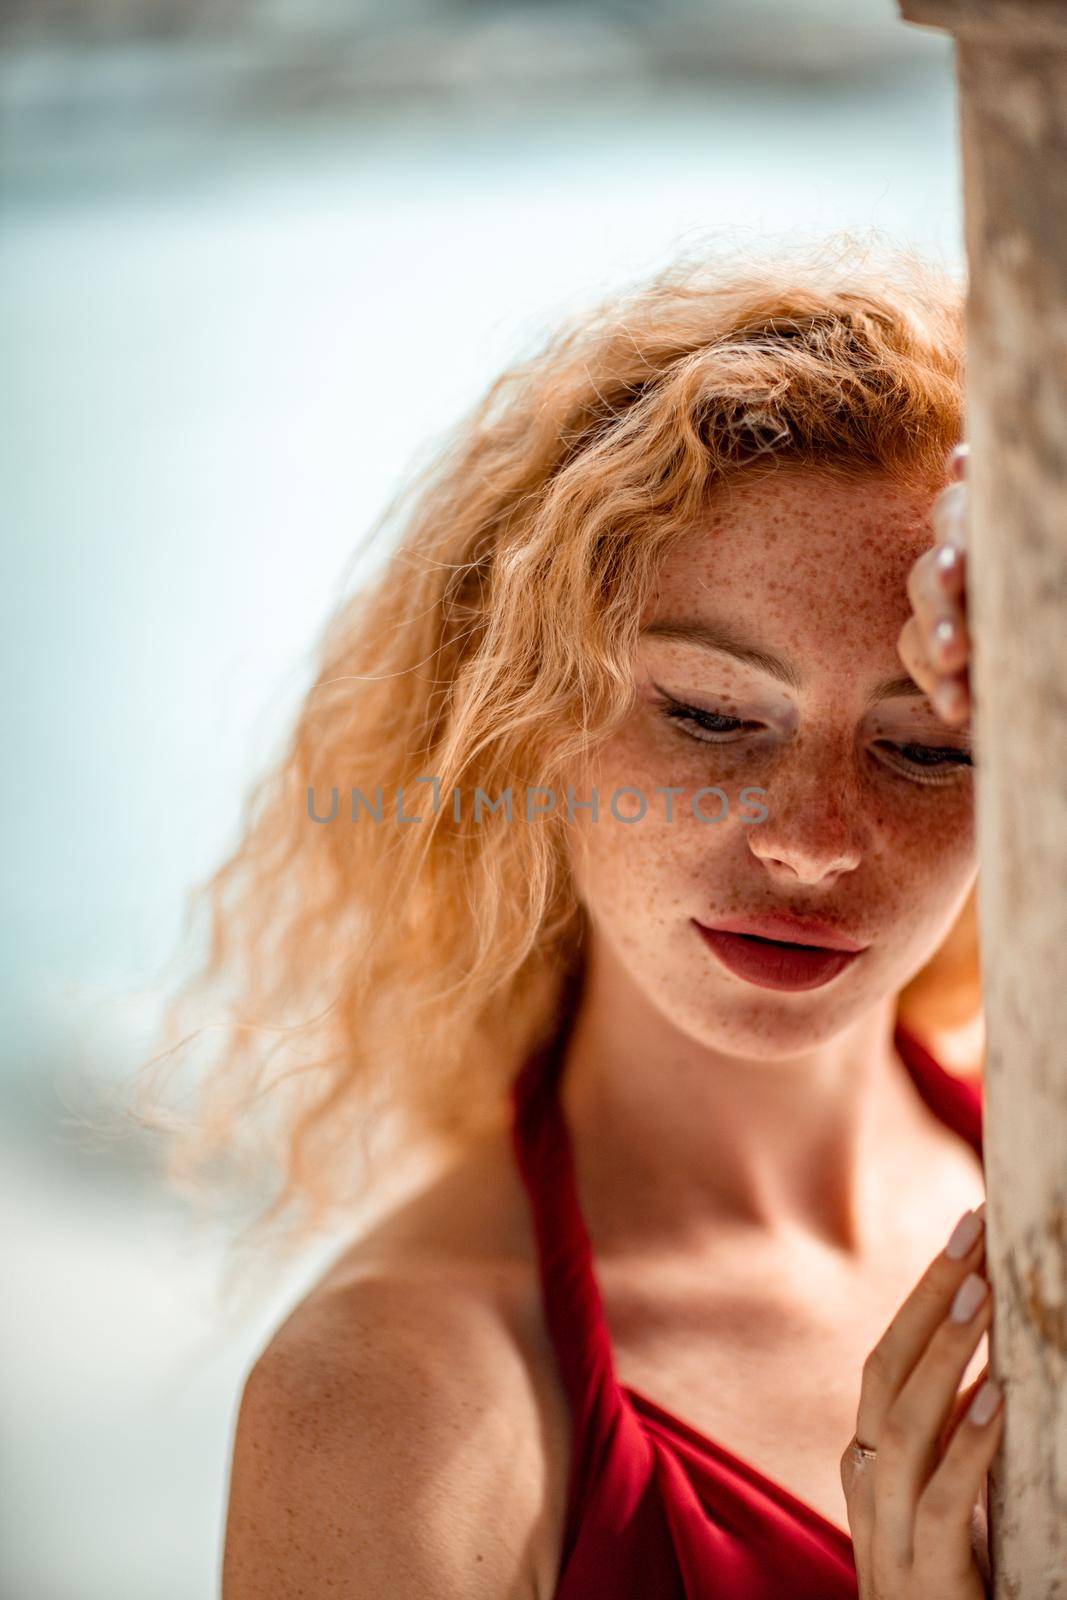 Outdoor portrait of a young beautiful natural redhead girl with freckles, long curly hair, in a red dress, posing against the background of the sea